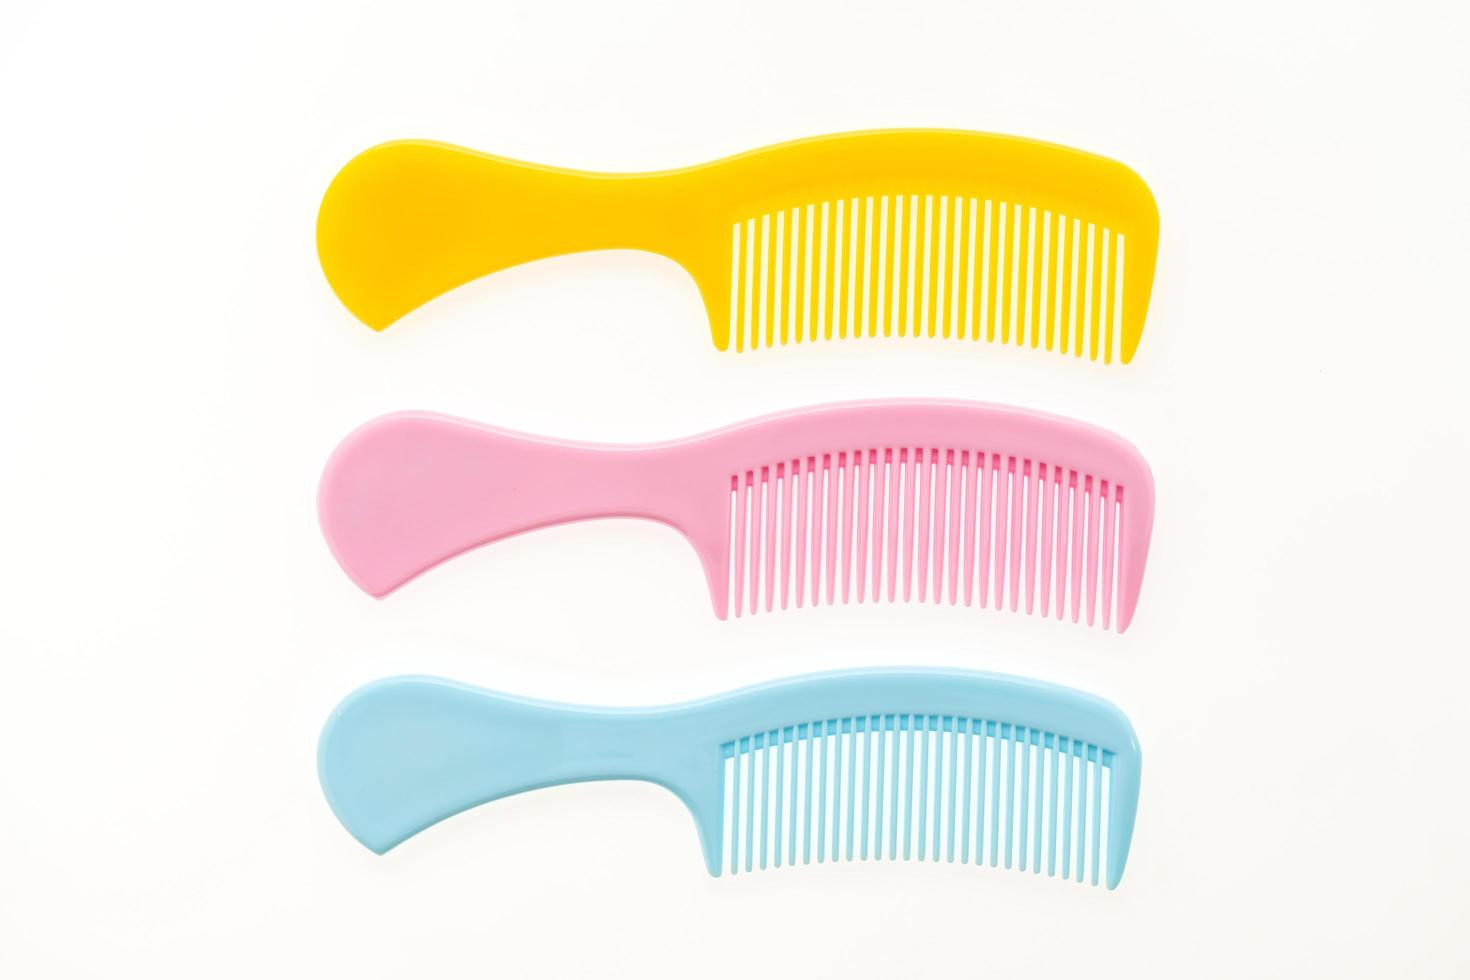 Plastic hair combs isolated on white background photo